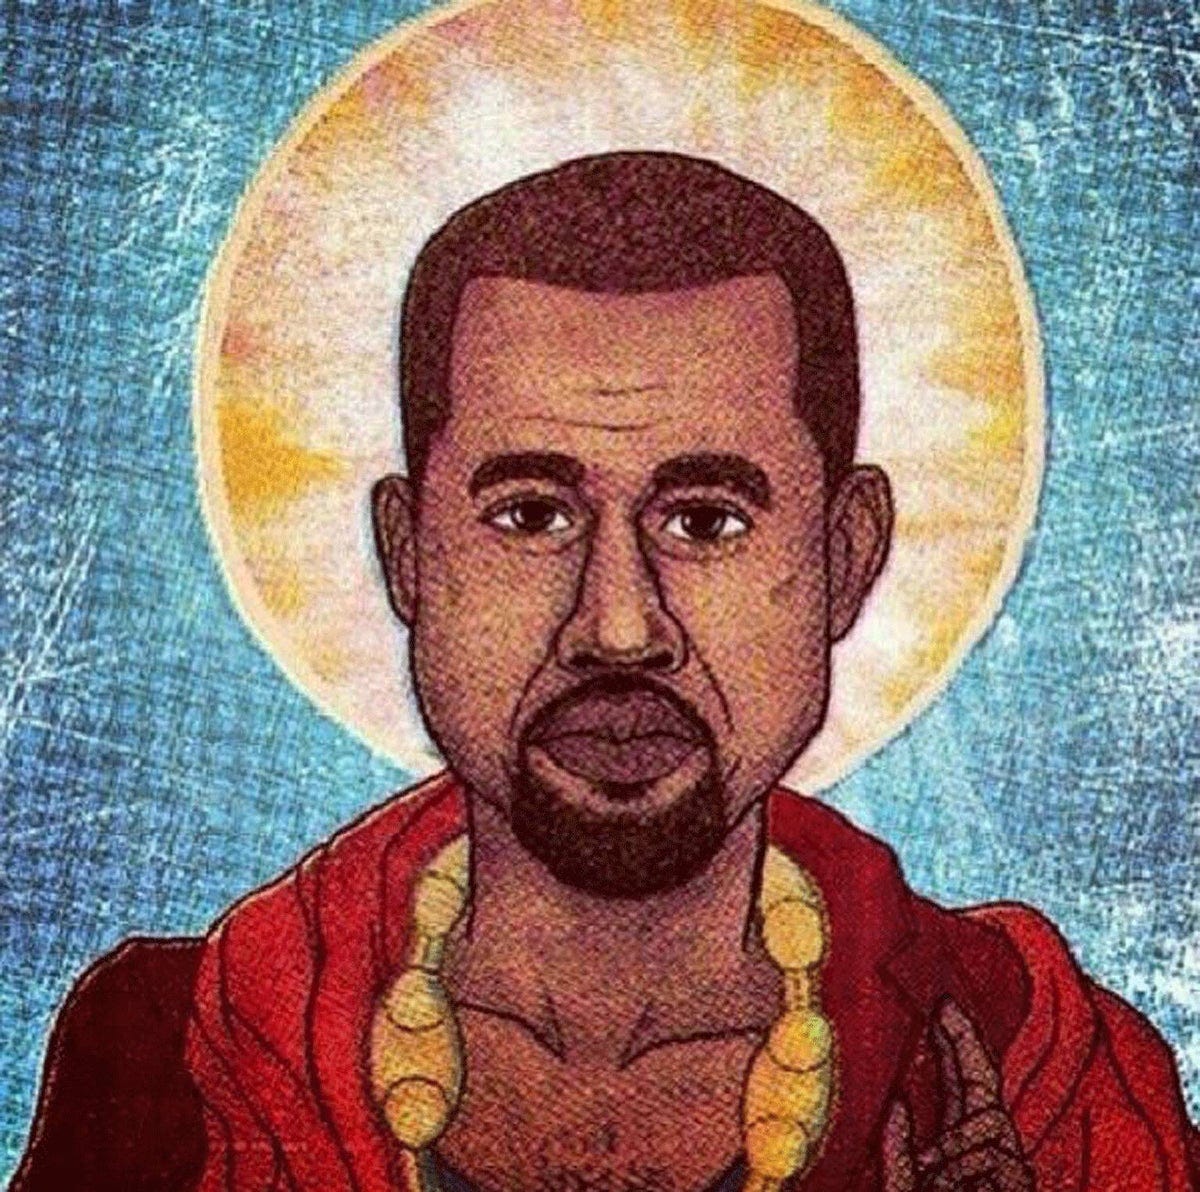 Yeezianity: The church of Kanye West | The Independent | The Independent